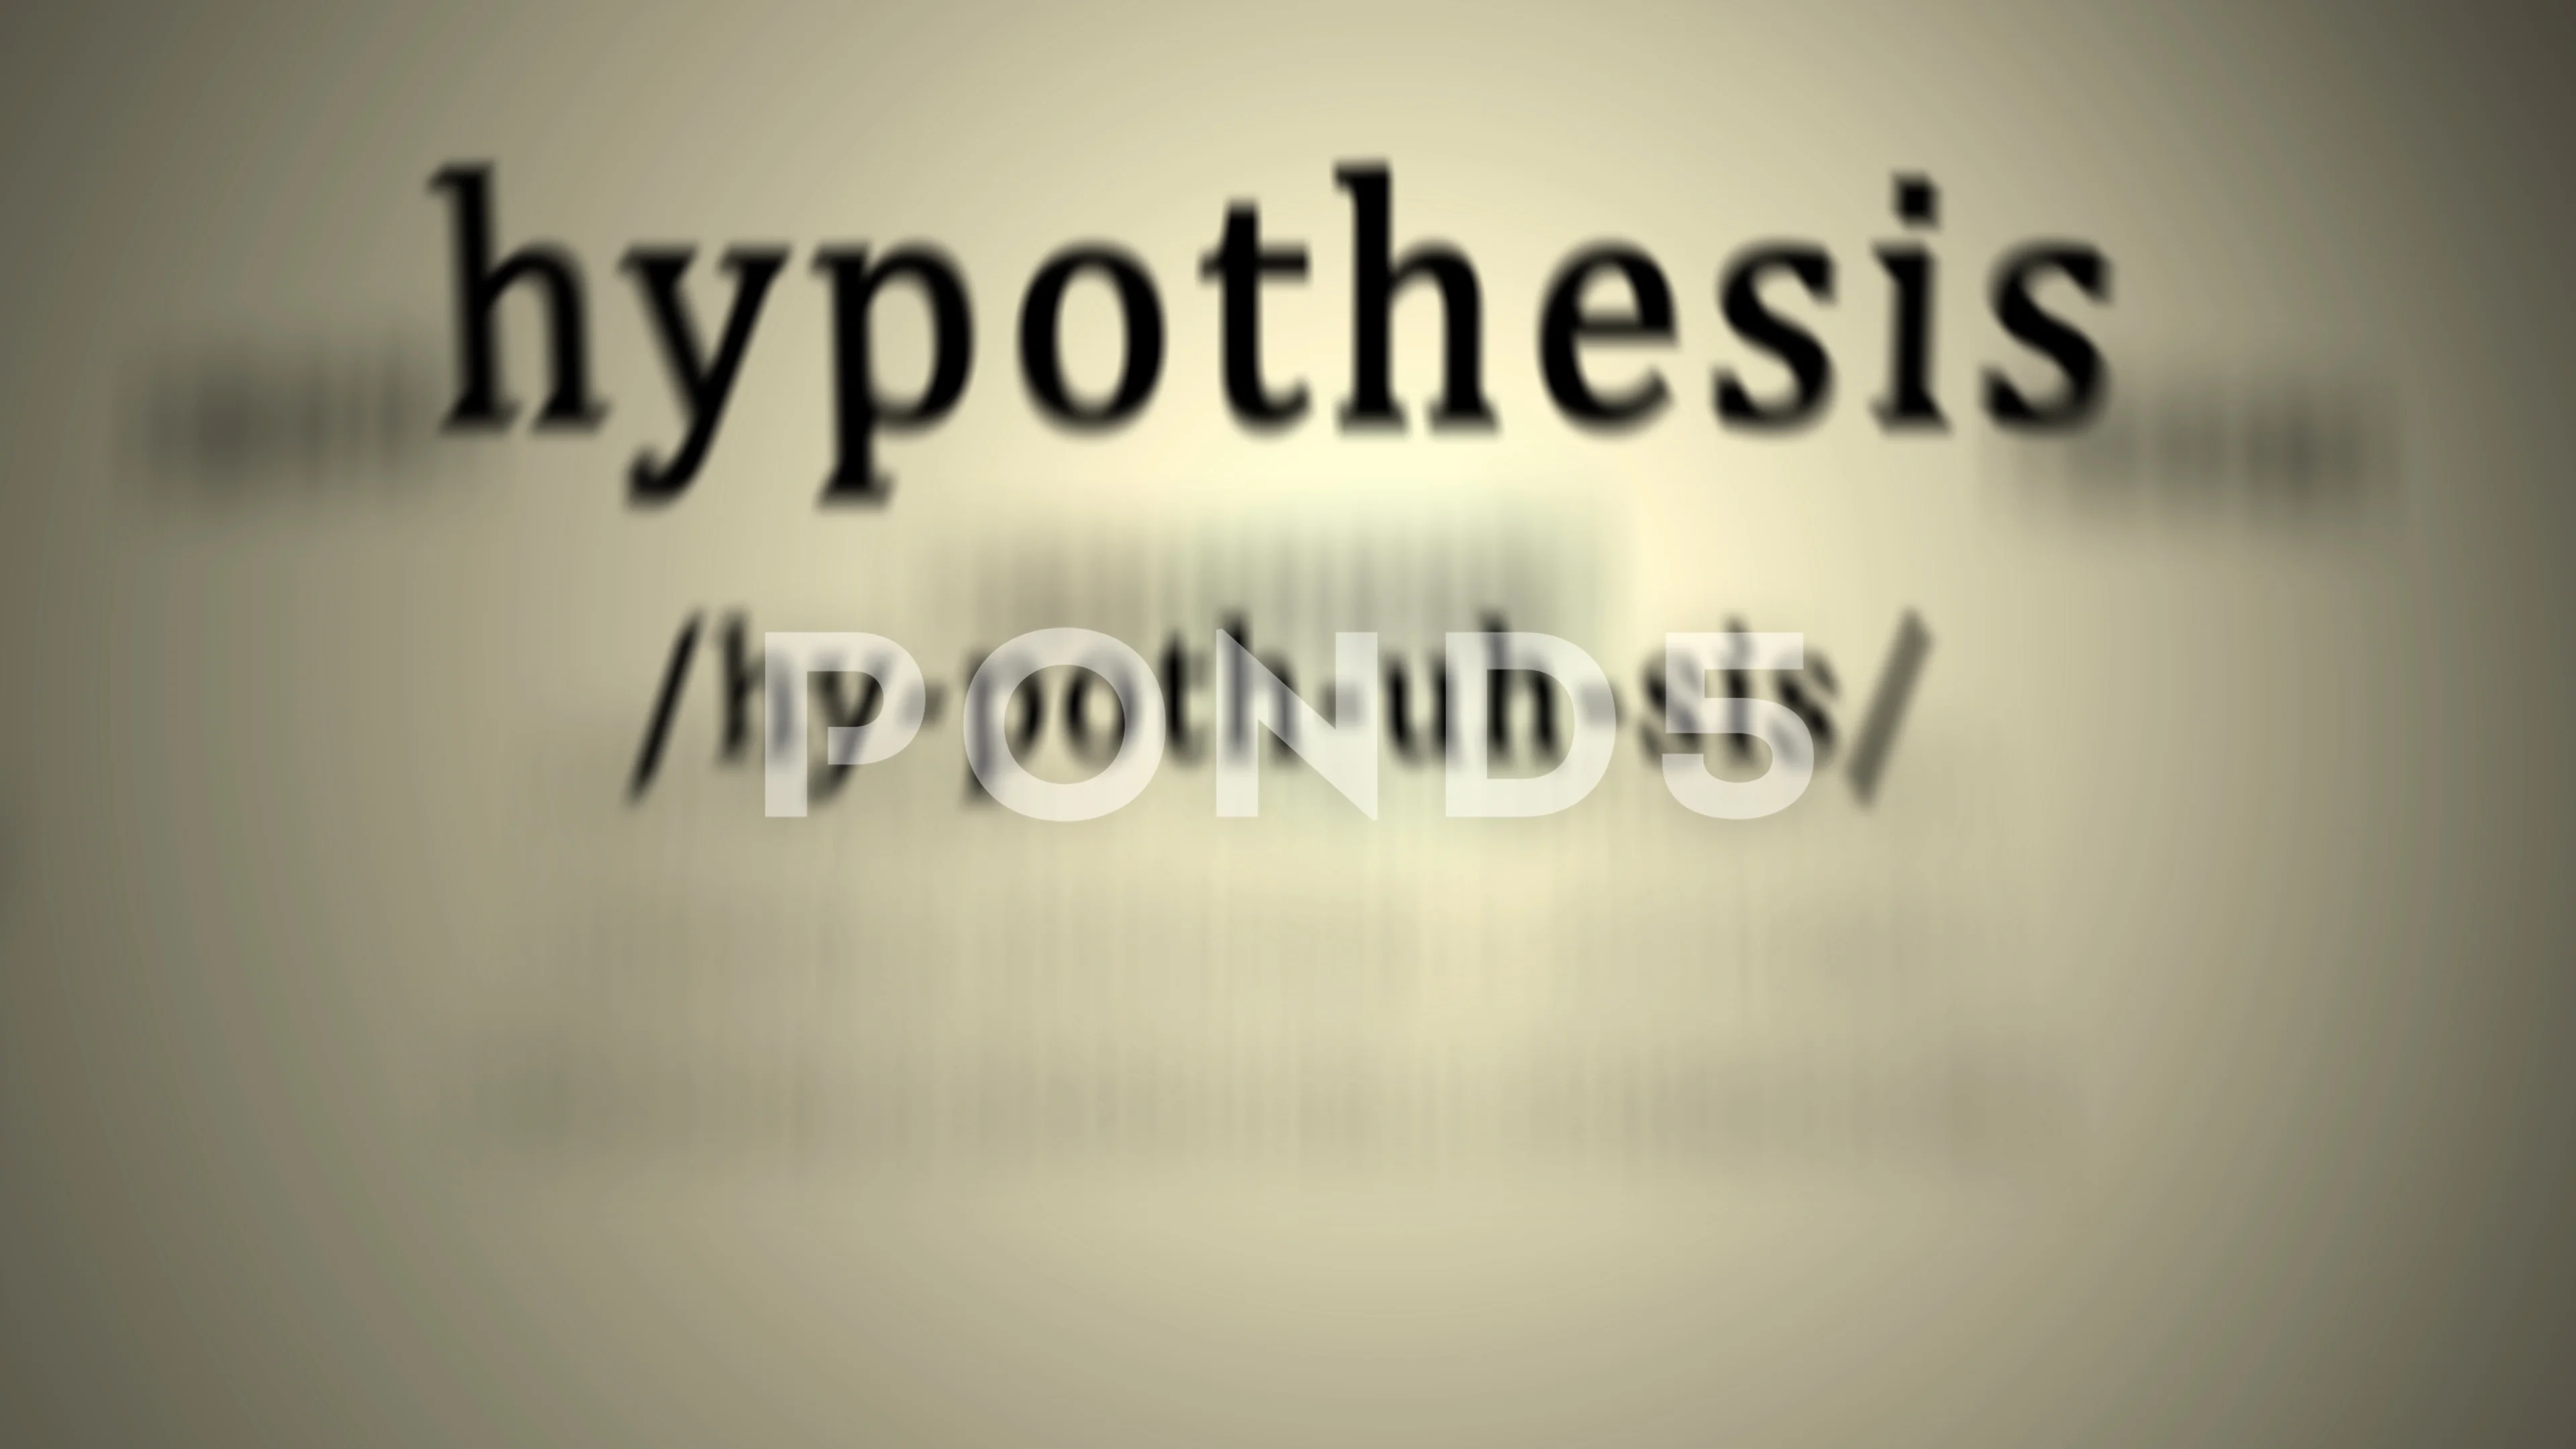 hypothesis definition